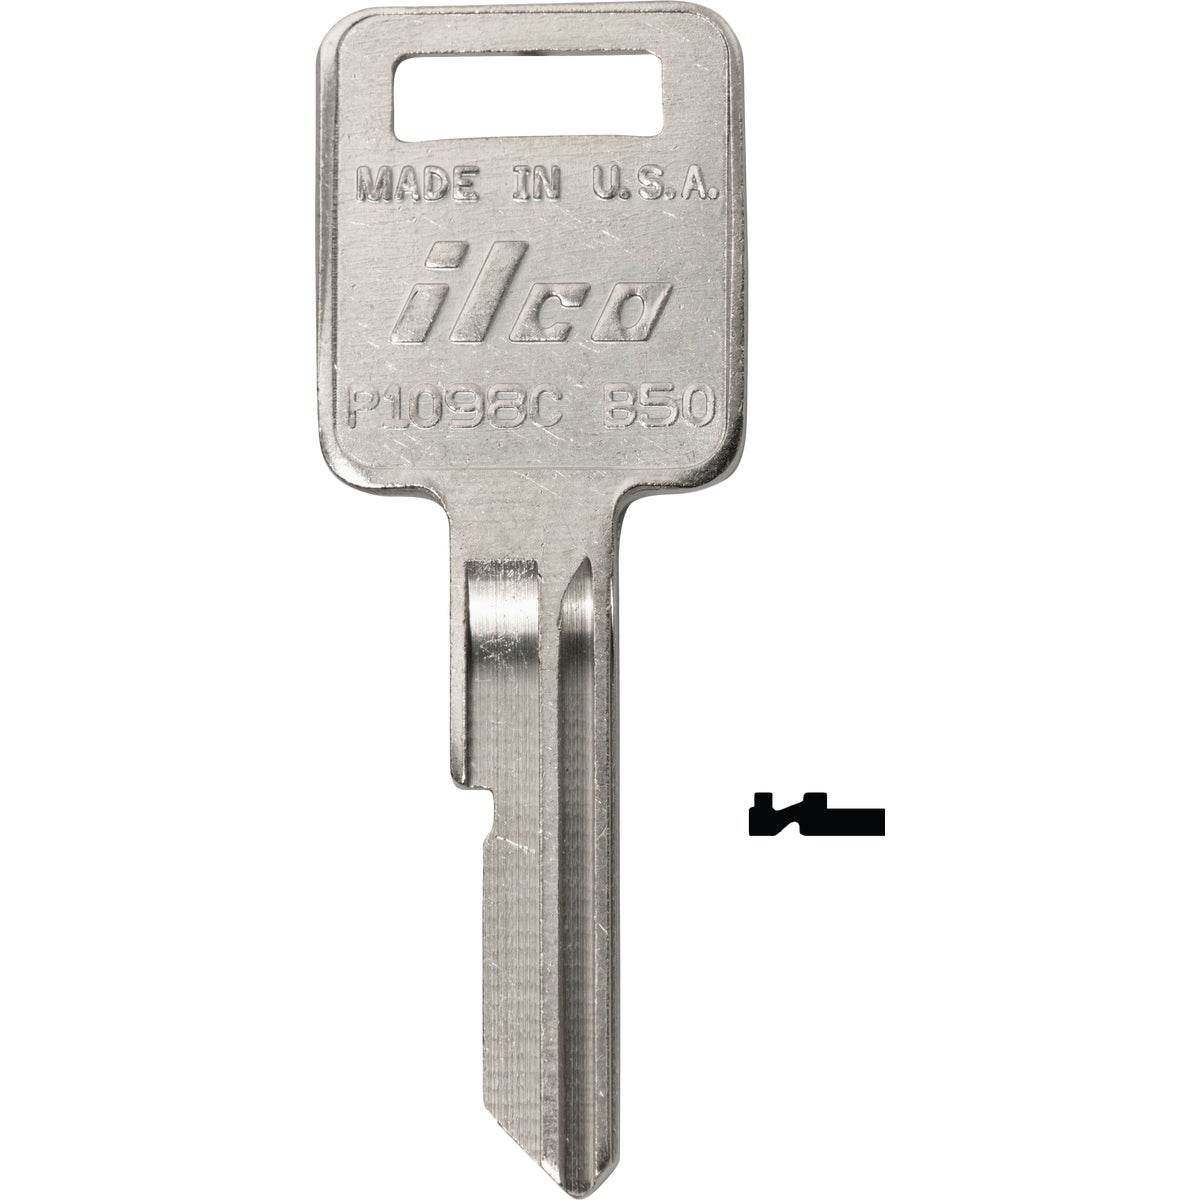 ILCO GM Nickel Plated Automotive Key, B48 / P1098A (10-Pack)